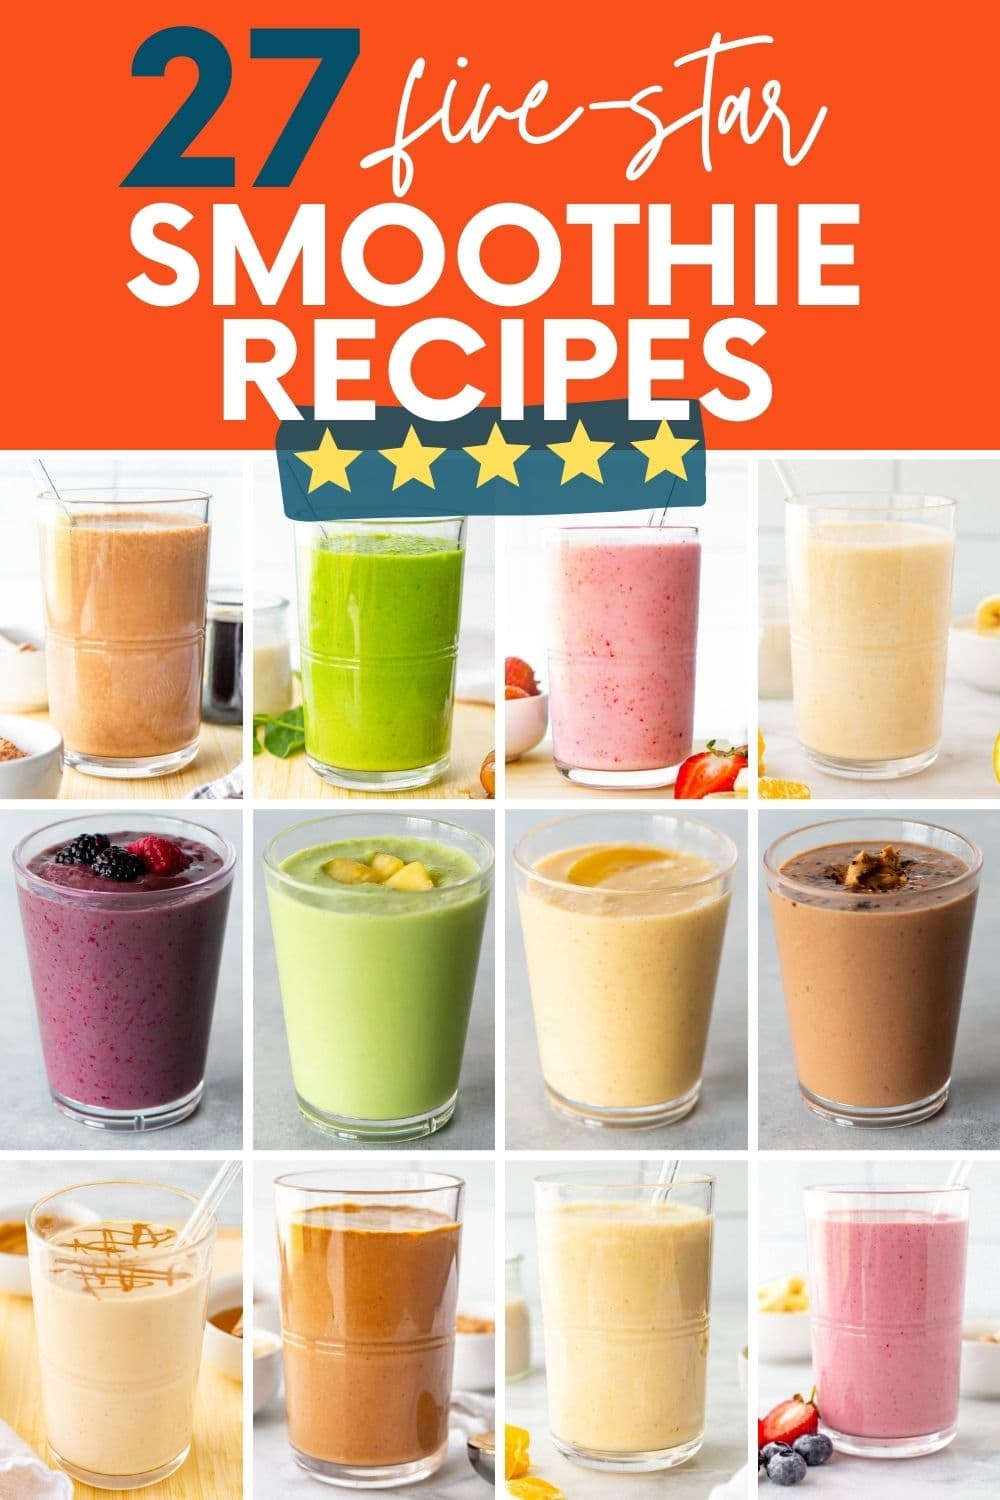 How to Make a Smoothie + 27 Simple Smoothie Recipes to Try | Wholefully